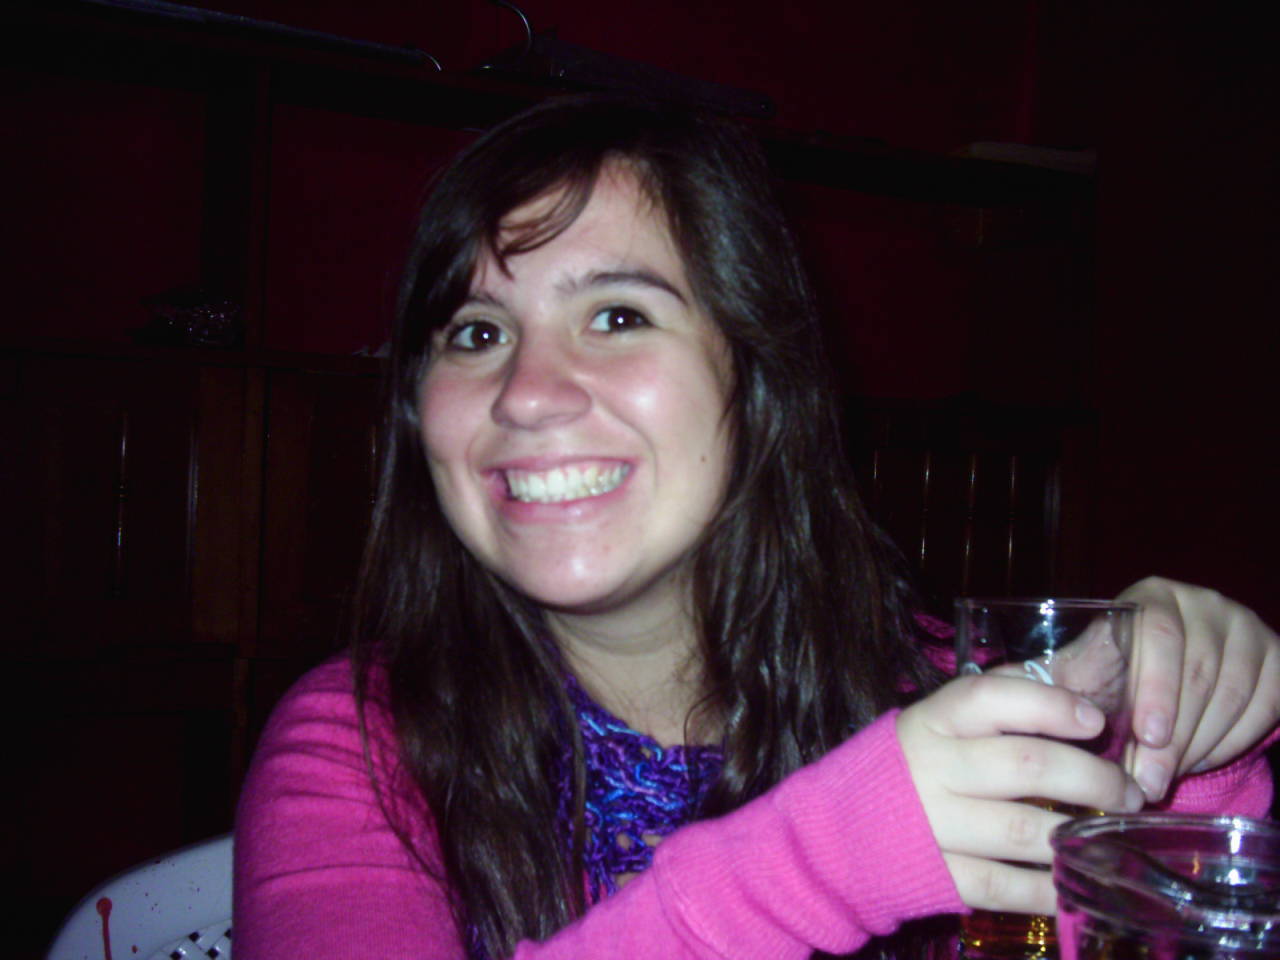 a smiling woman in pink is holding up a glass